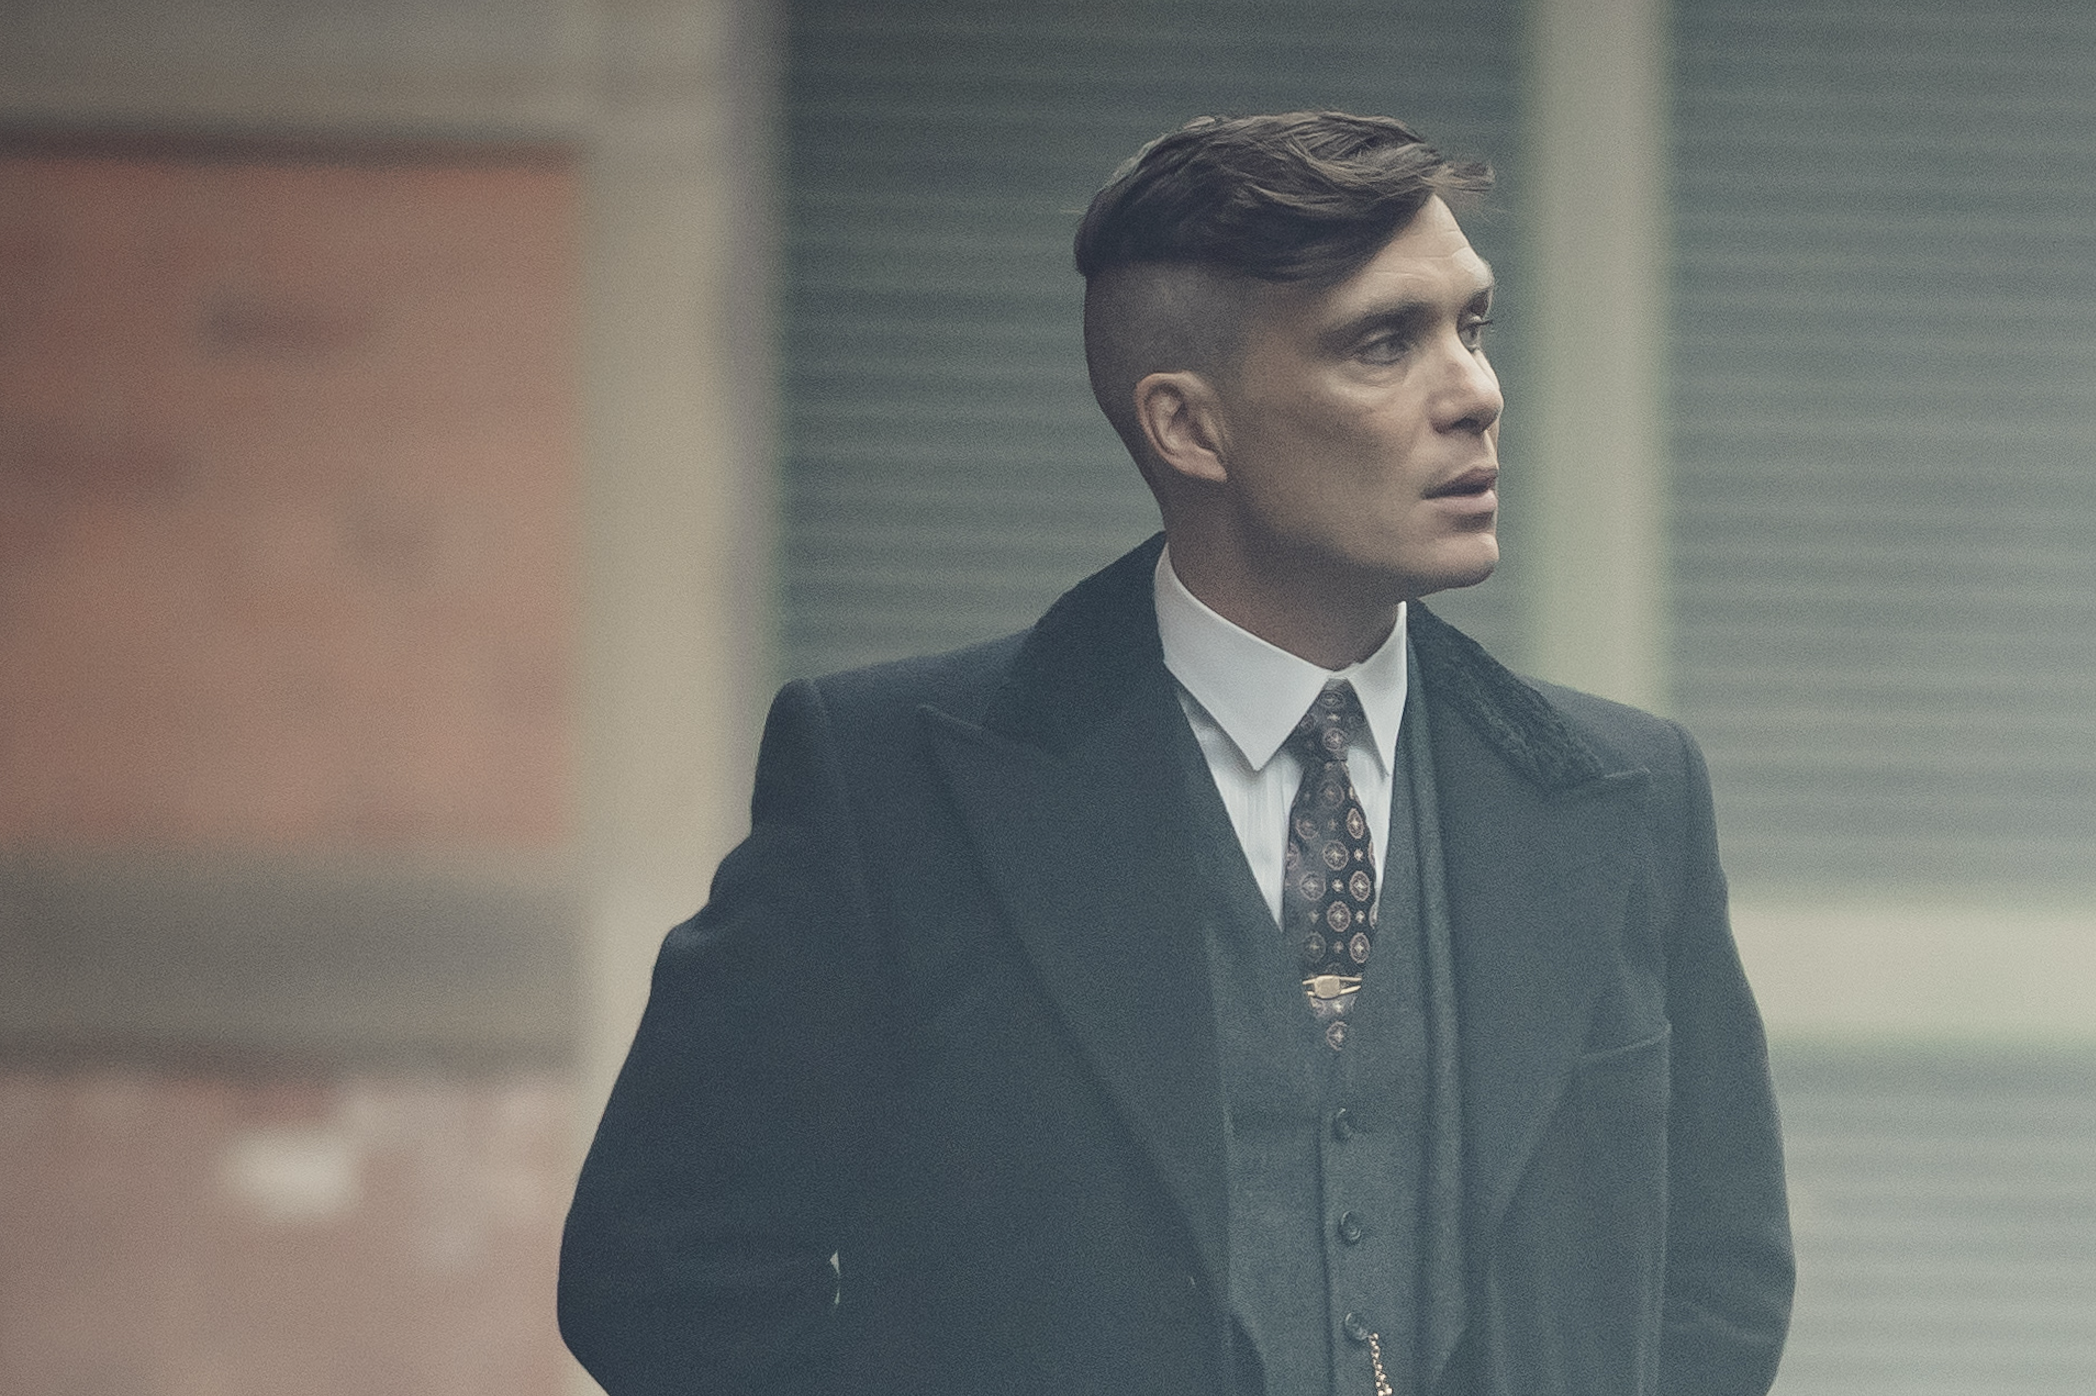 Season 5 of BBC's 'Peaky Blinders' Aims for a More Cinematic Look